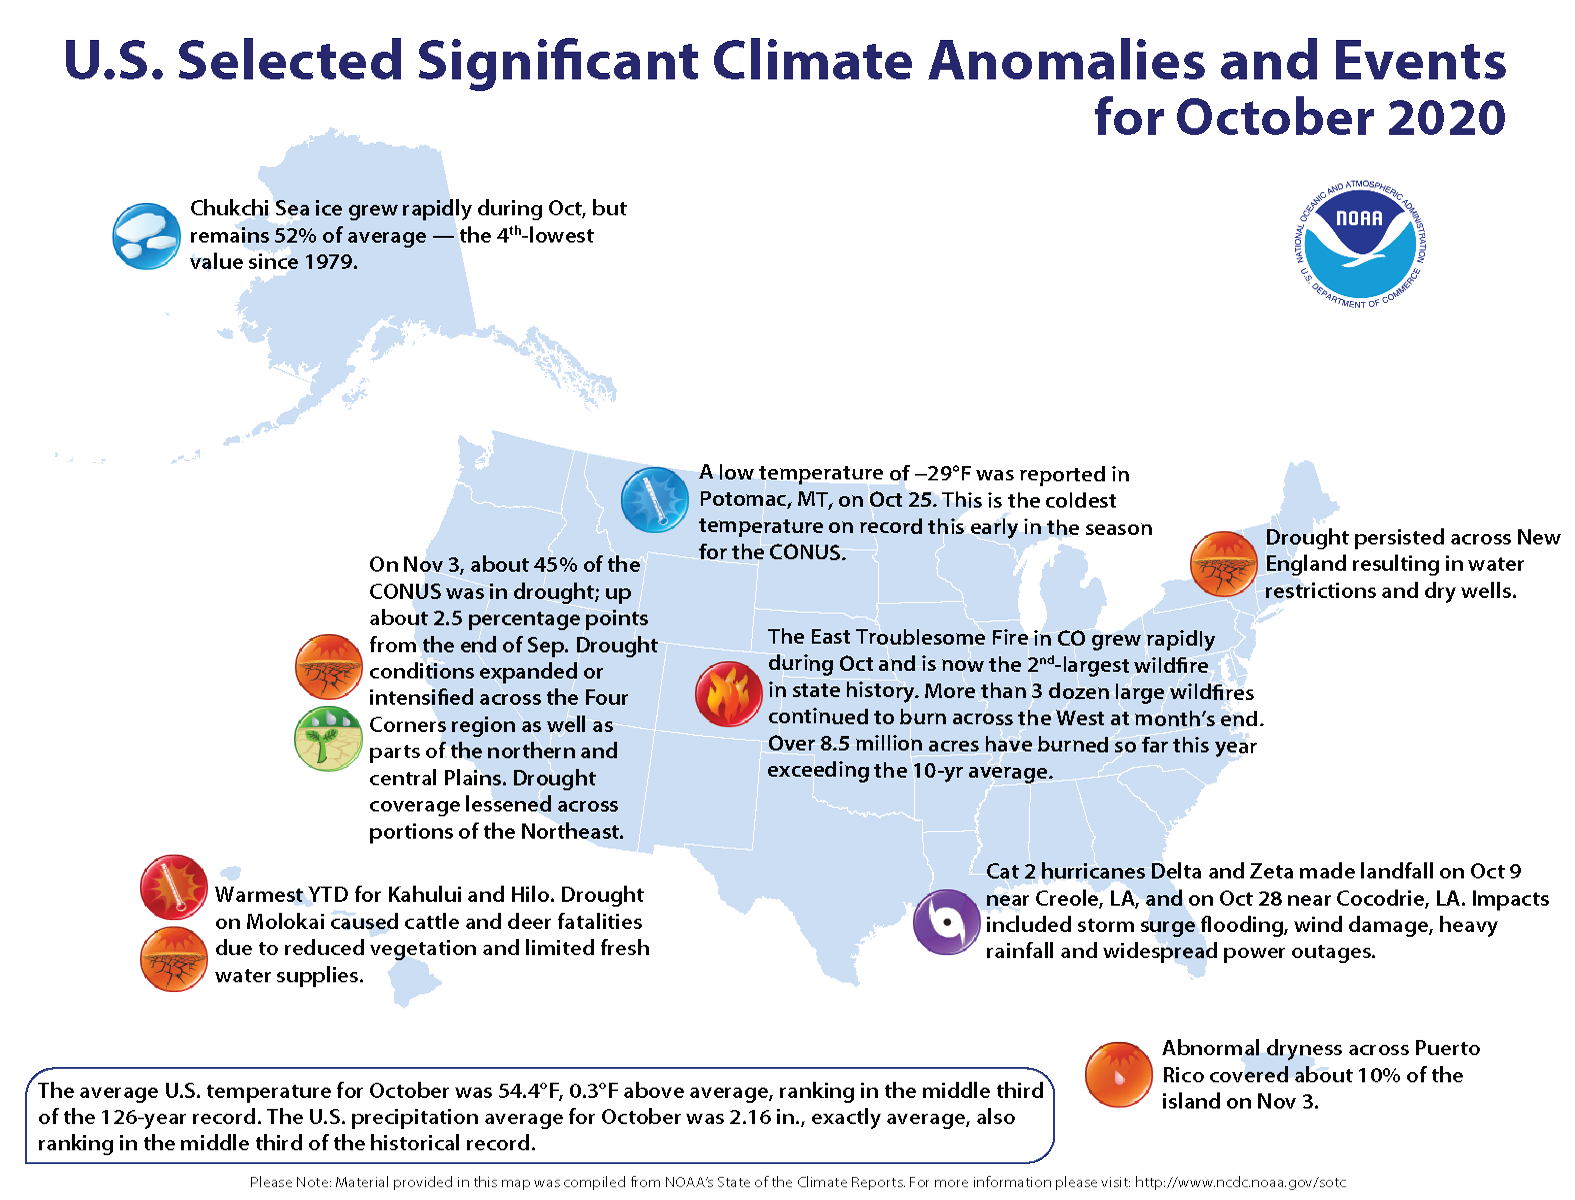 September Extreme Weather/Climate Events